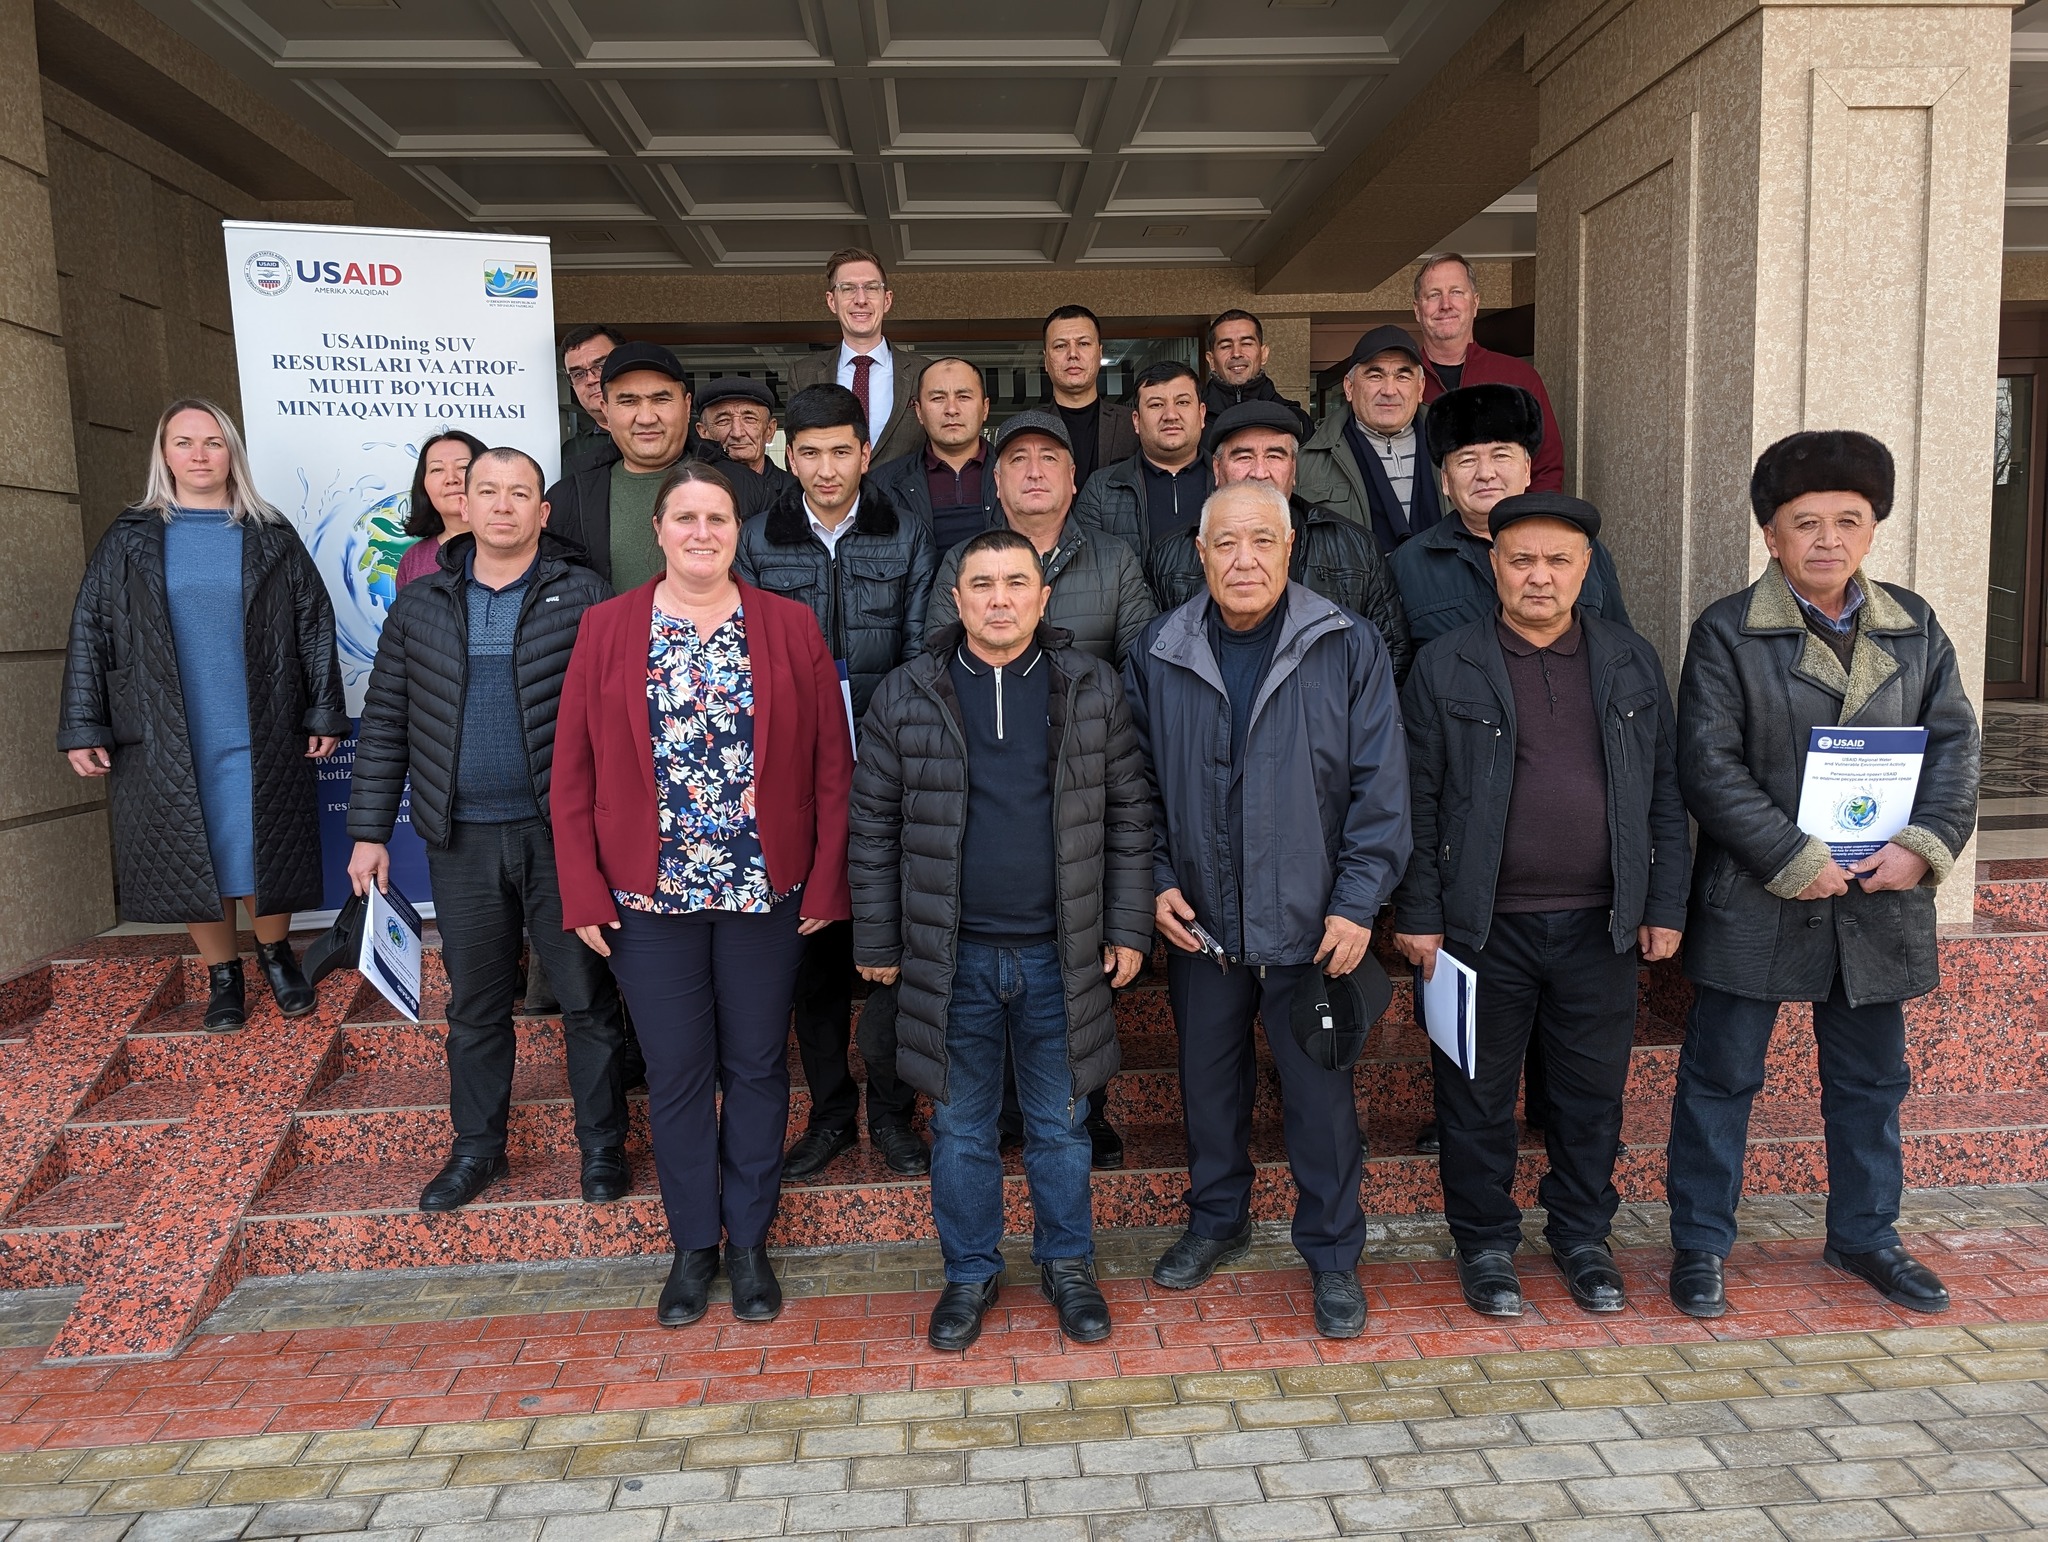 USAID supported the meeting of the Small Basin Council (MBS) of the Uzbek side of the Padshaat River